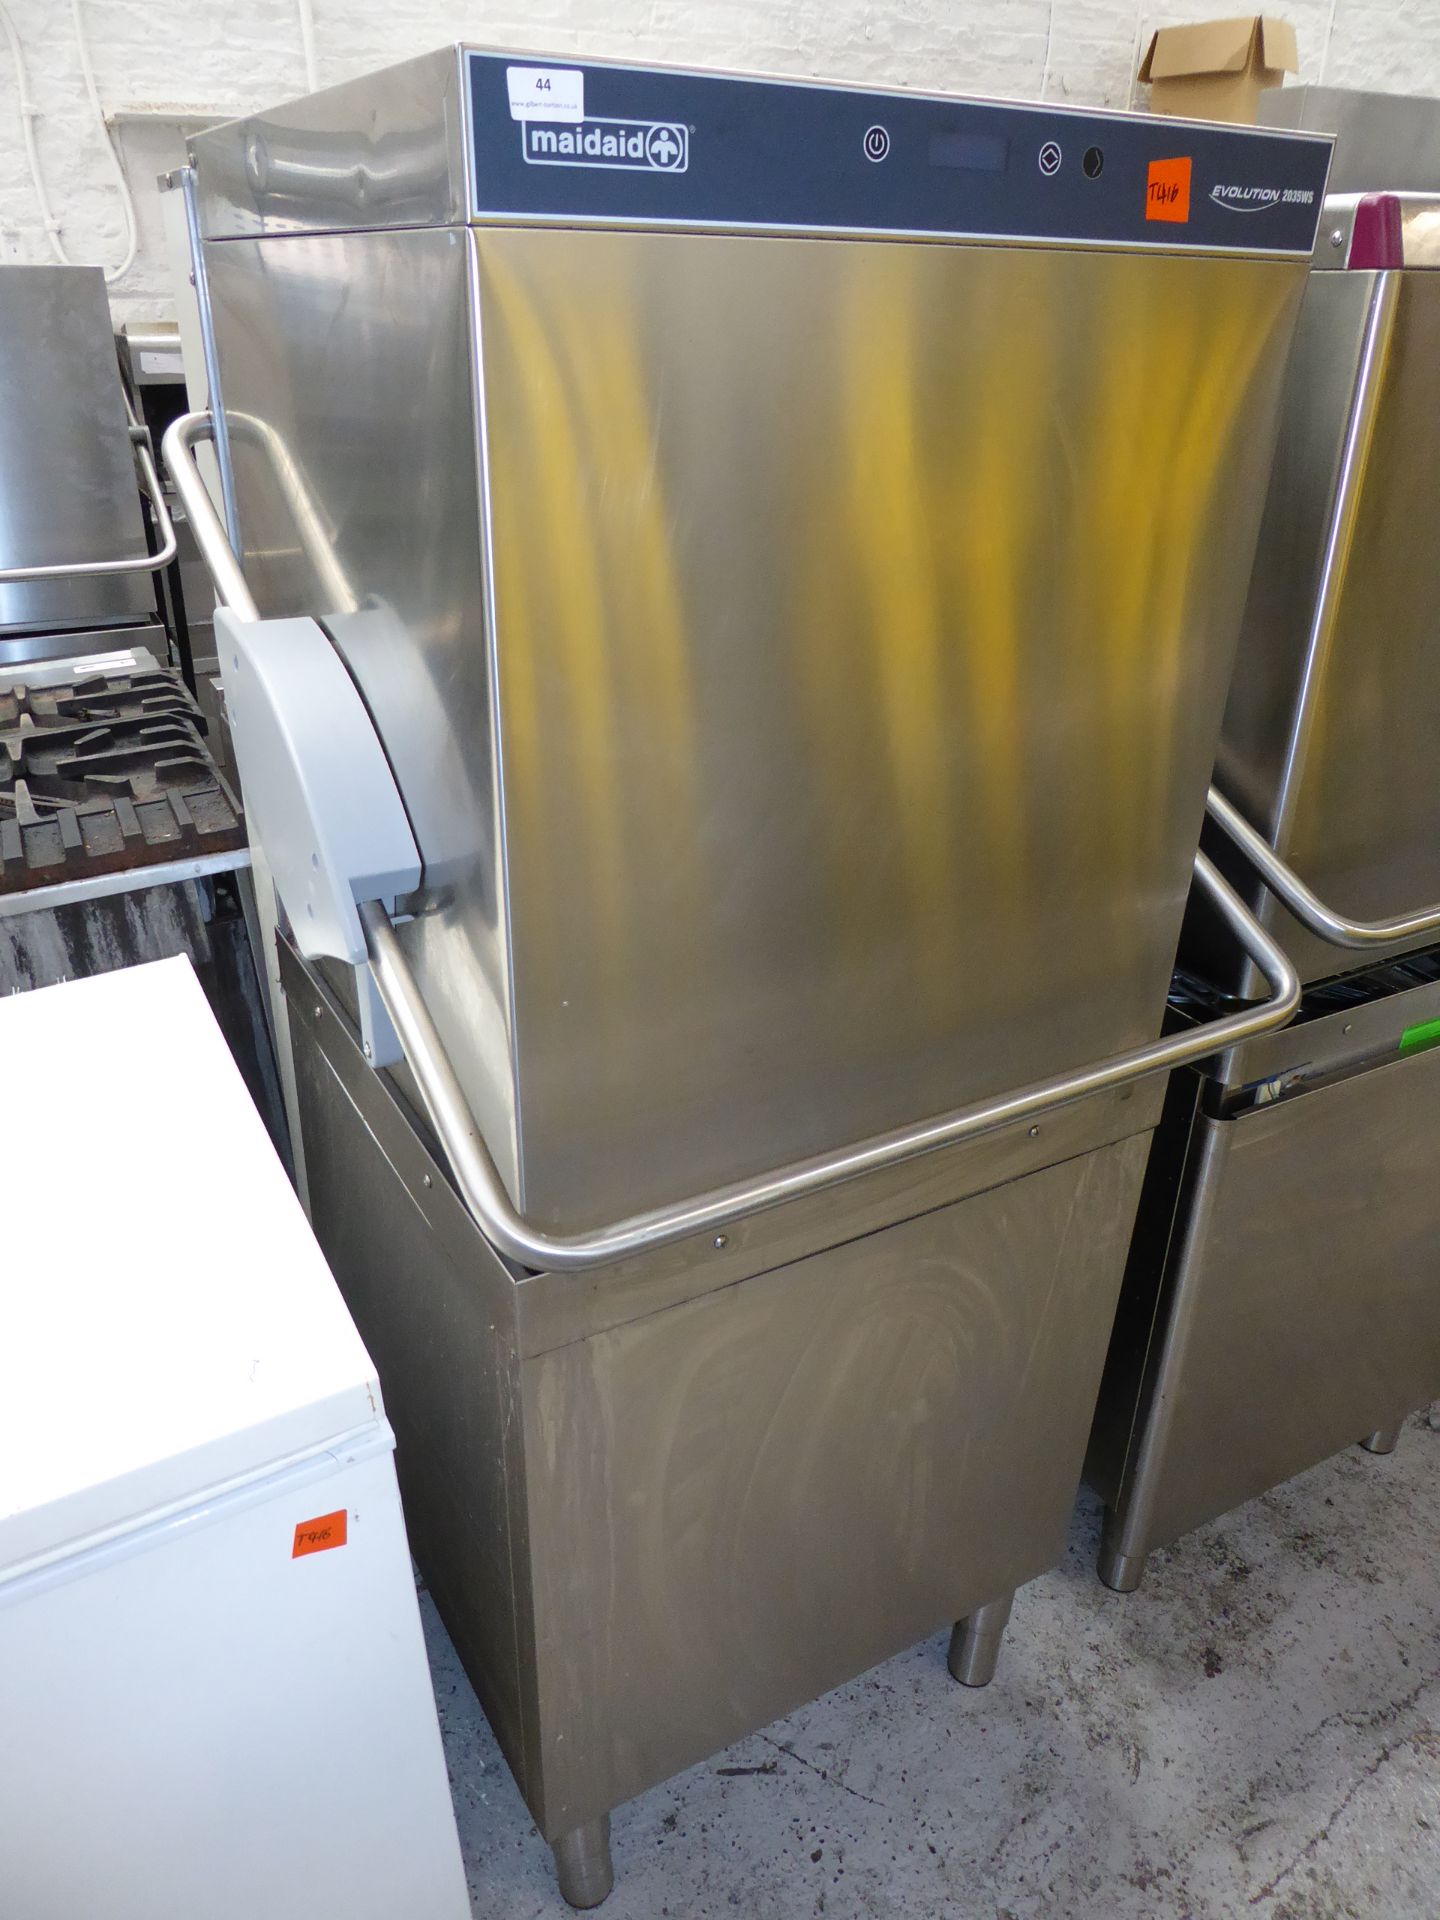 *Maidaid 2035WS pass through dishwasher - good condition, direct from national chain (